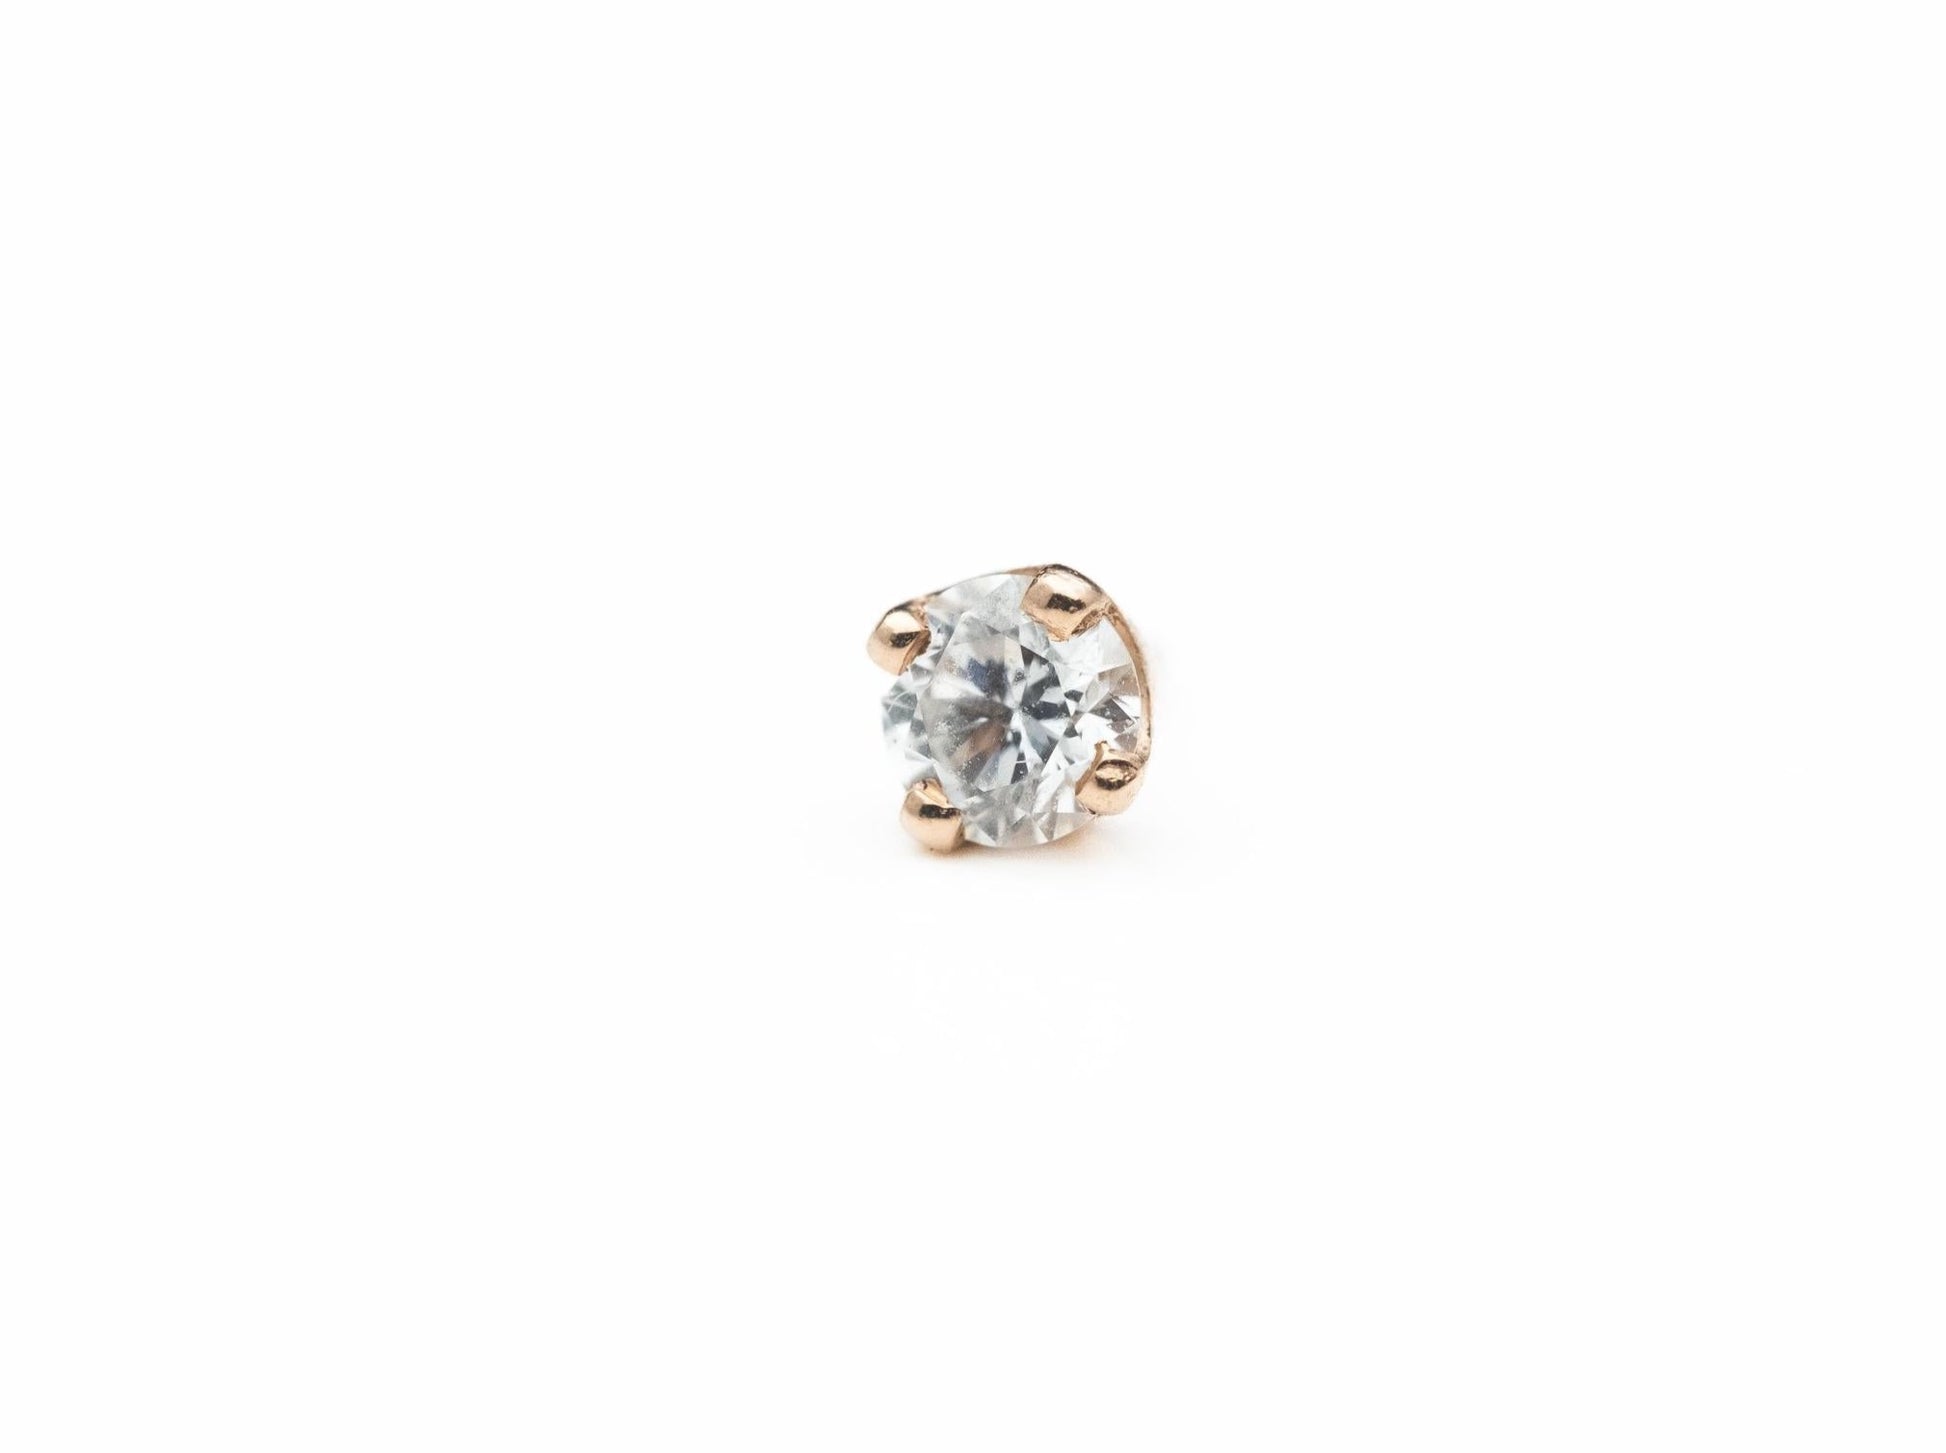 Round Prong 2.5mm VS Diamond in 14k Rose Gold Threadless by BVLA